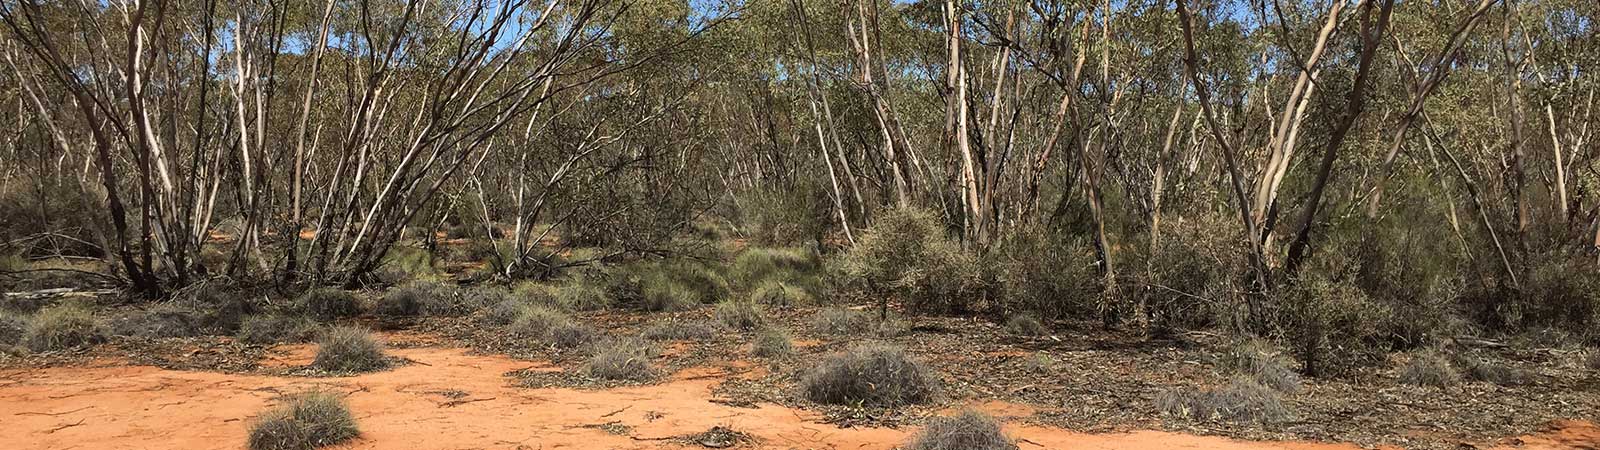 Mallee fowl bird habitat, very orange ground with some spindly trees in the background.